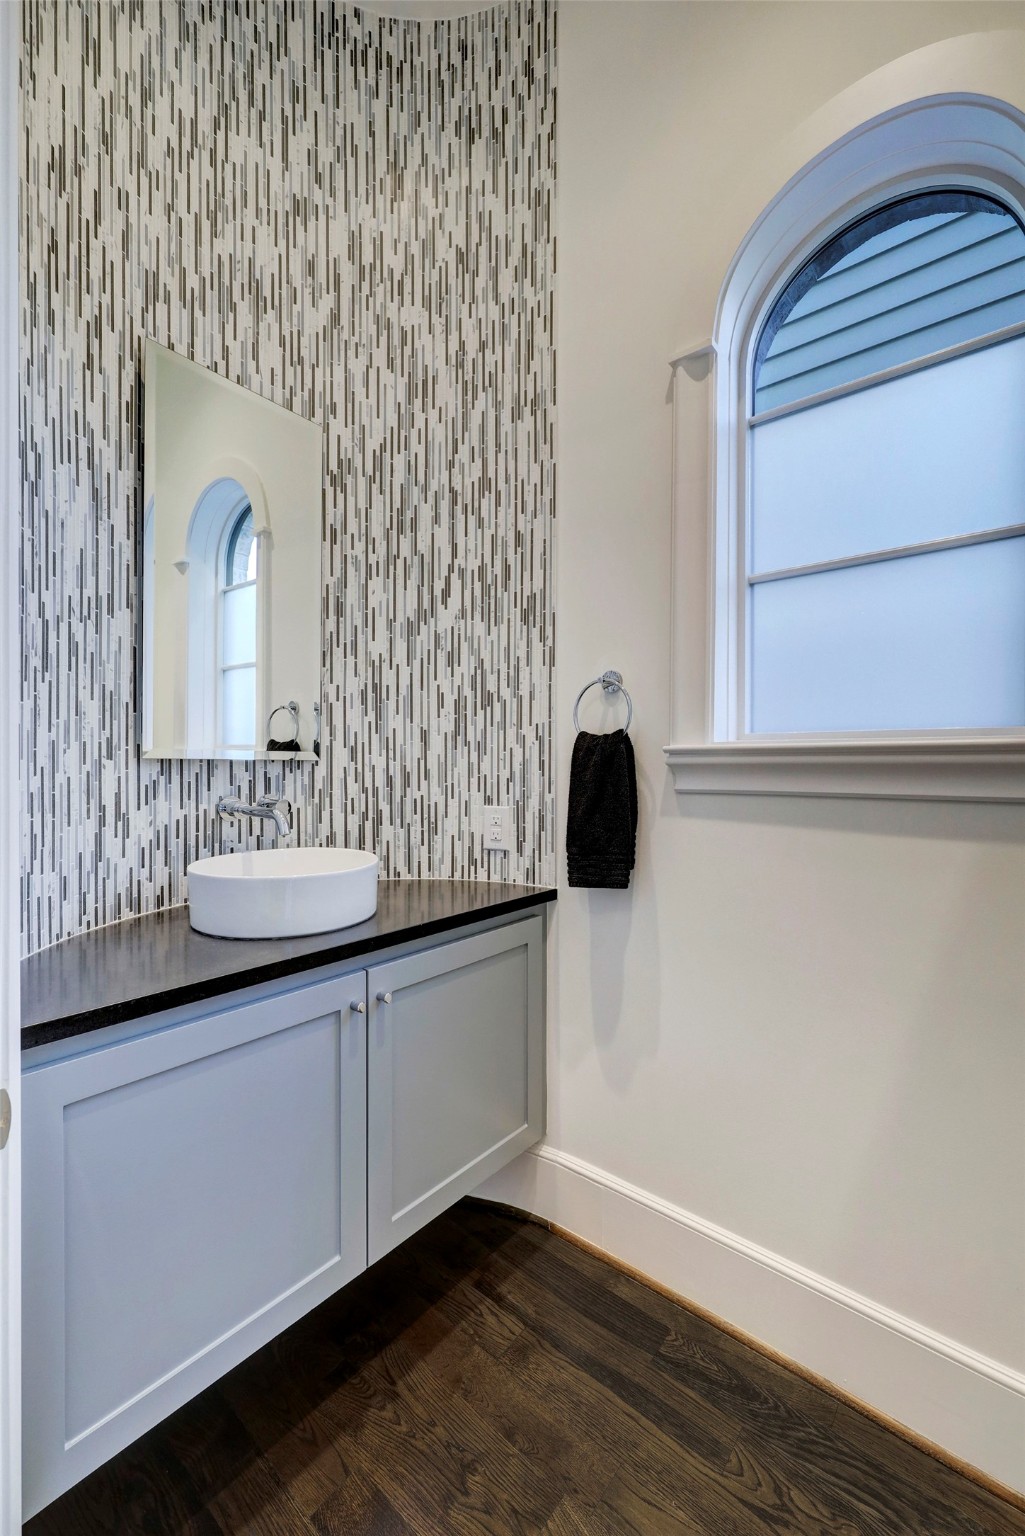 The curvature of the powder room marble backsplash is another example of the
sophistication of this home. Not shown is the Geberit European
luxury toilet, which is included.